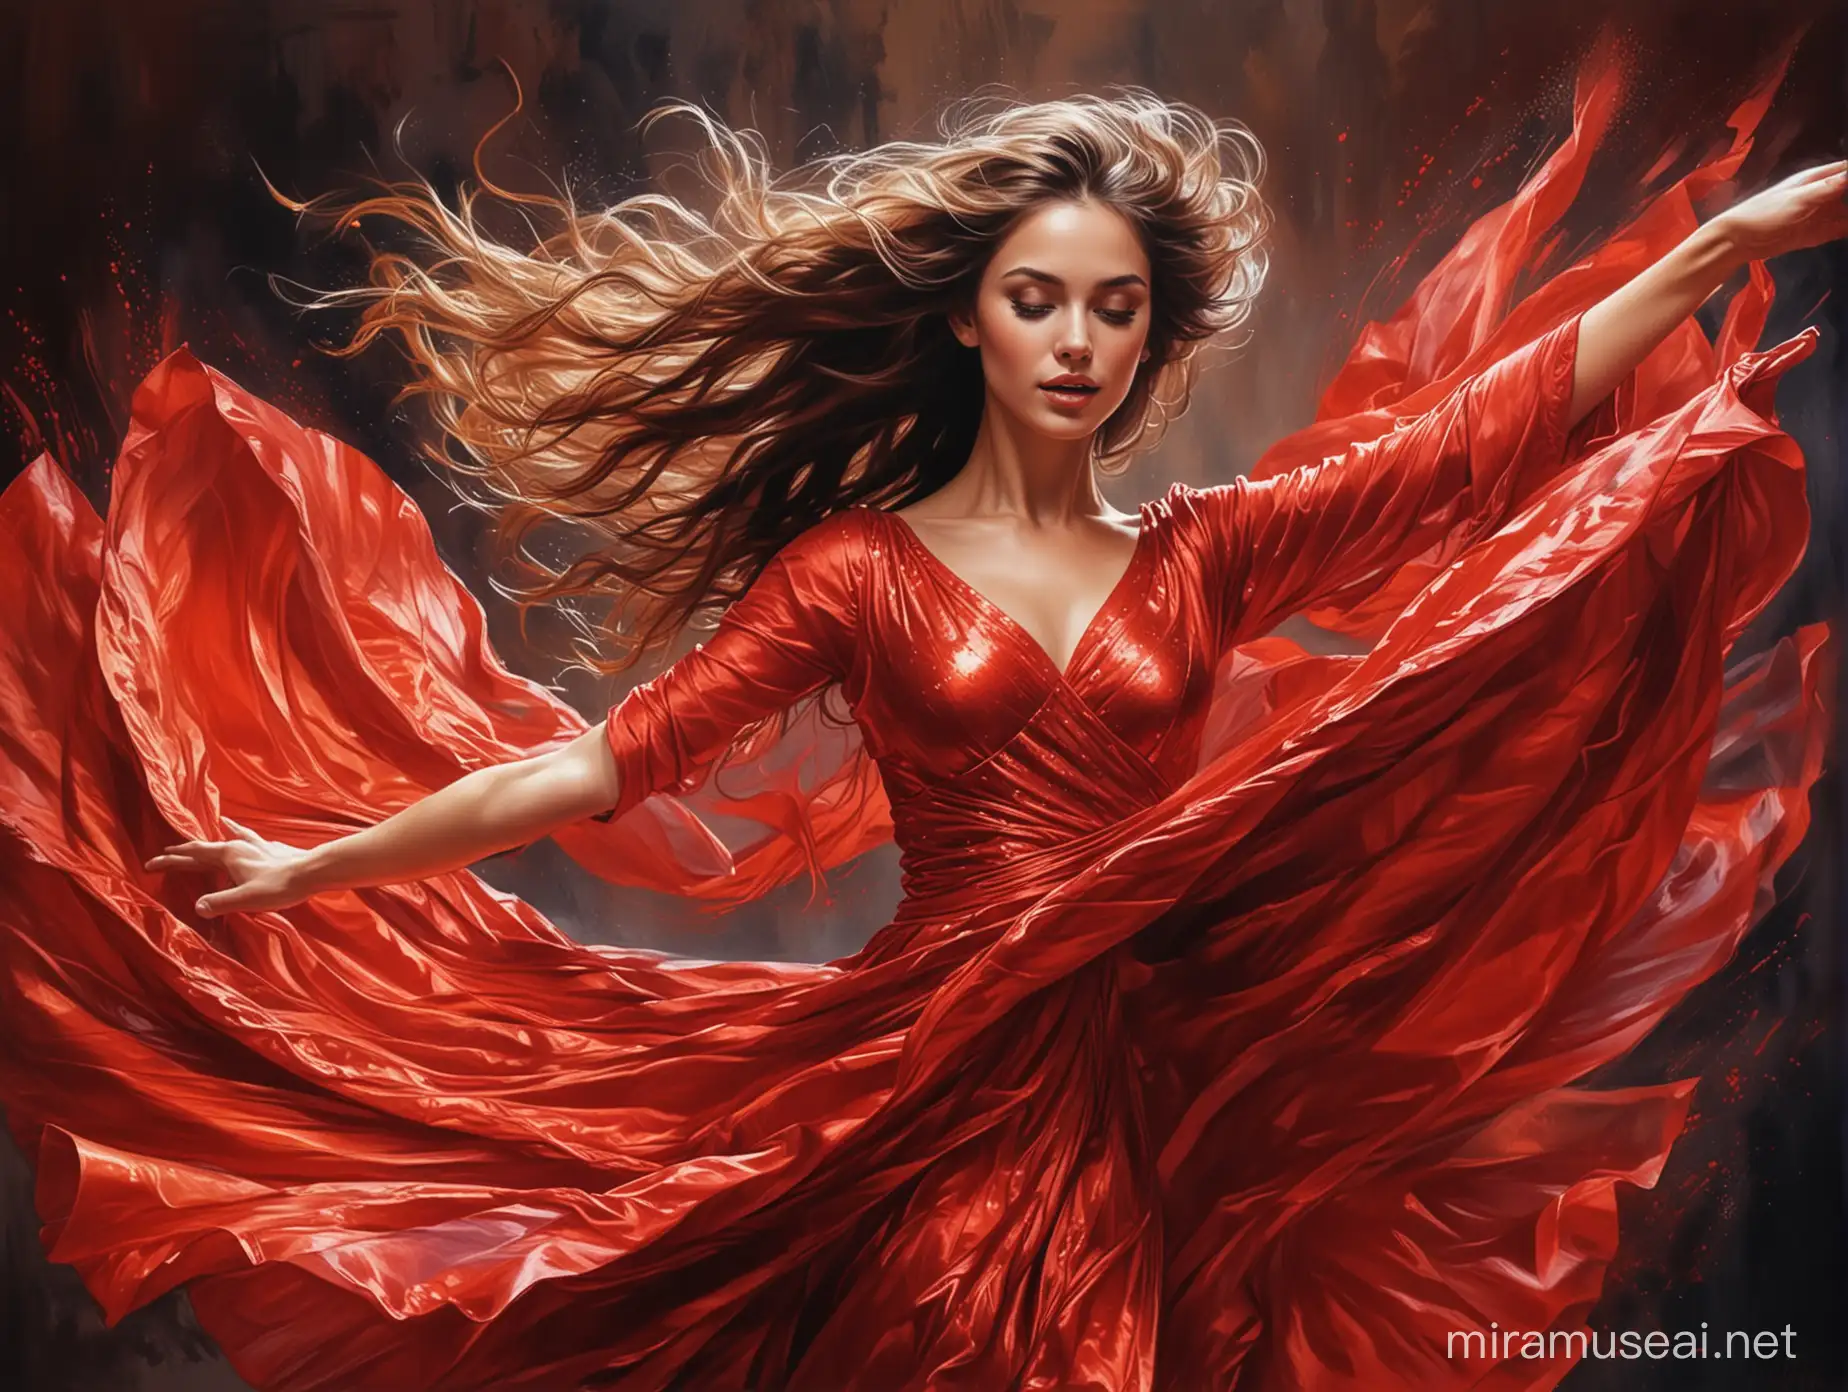 Professional Red Dress Dancer Capturing the Beauty of Dynamic Movements